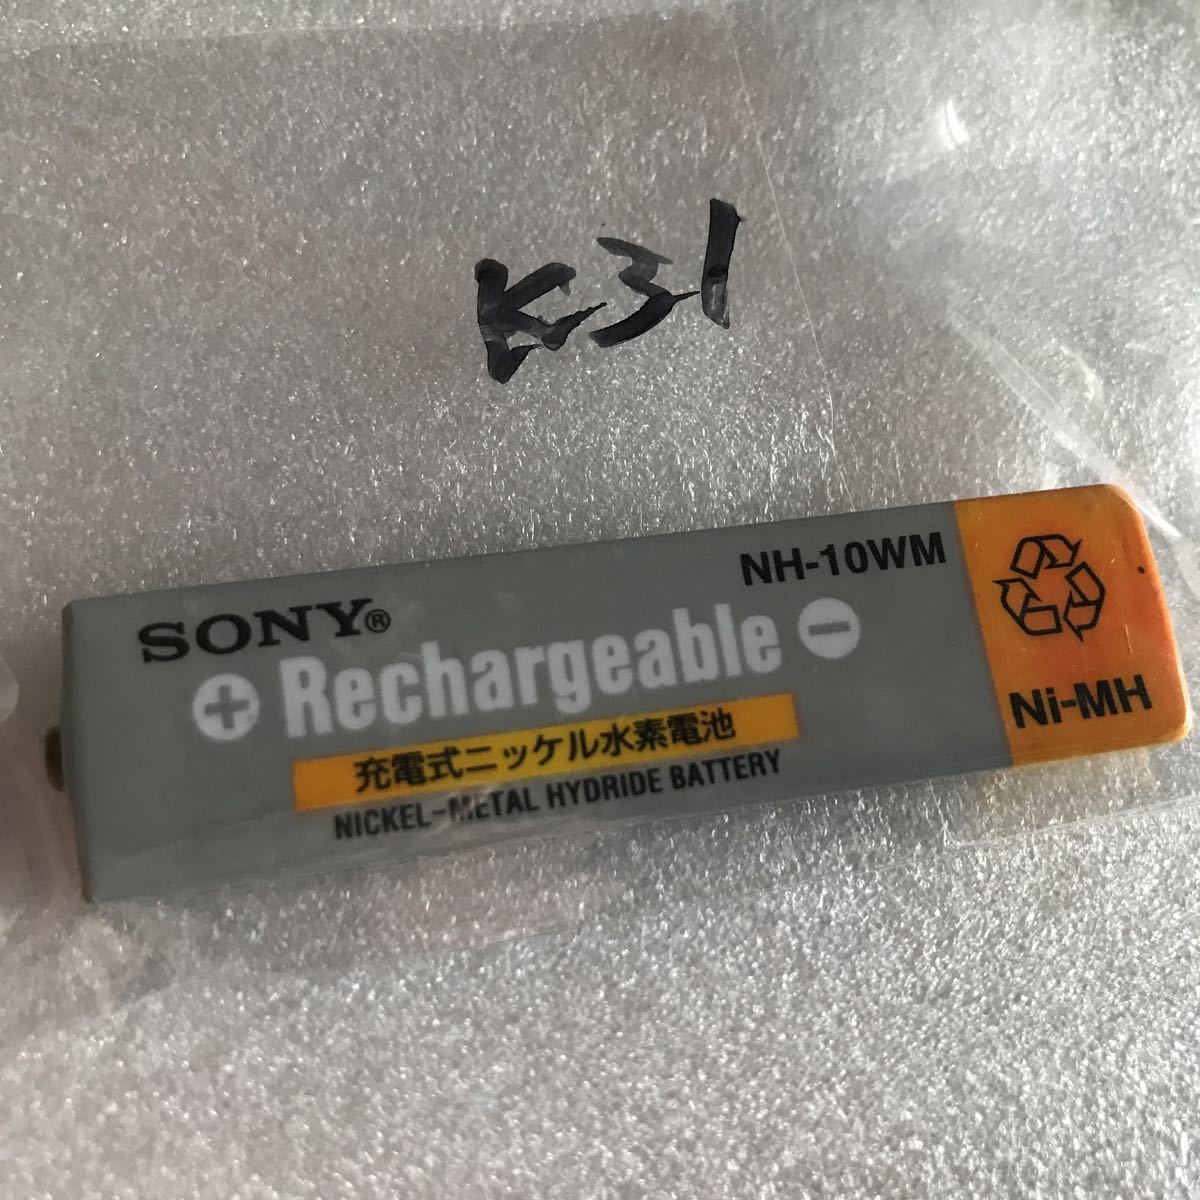  operation not yet verification SONY Sony nickel water element chewing gum battery rechargeable battery NH-10WM 1.2V 900mAh MD player CD player Walkman exclusive use Junk 